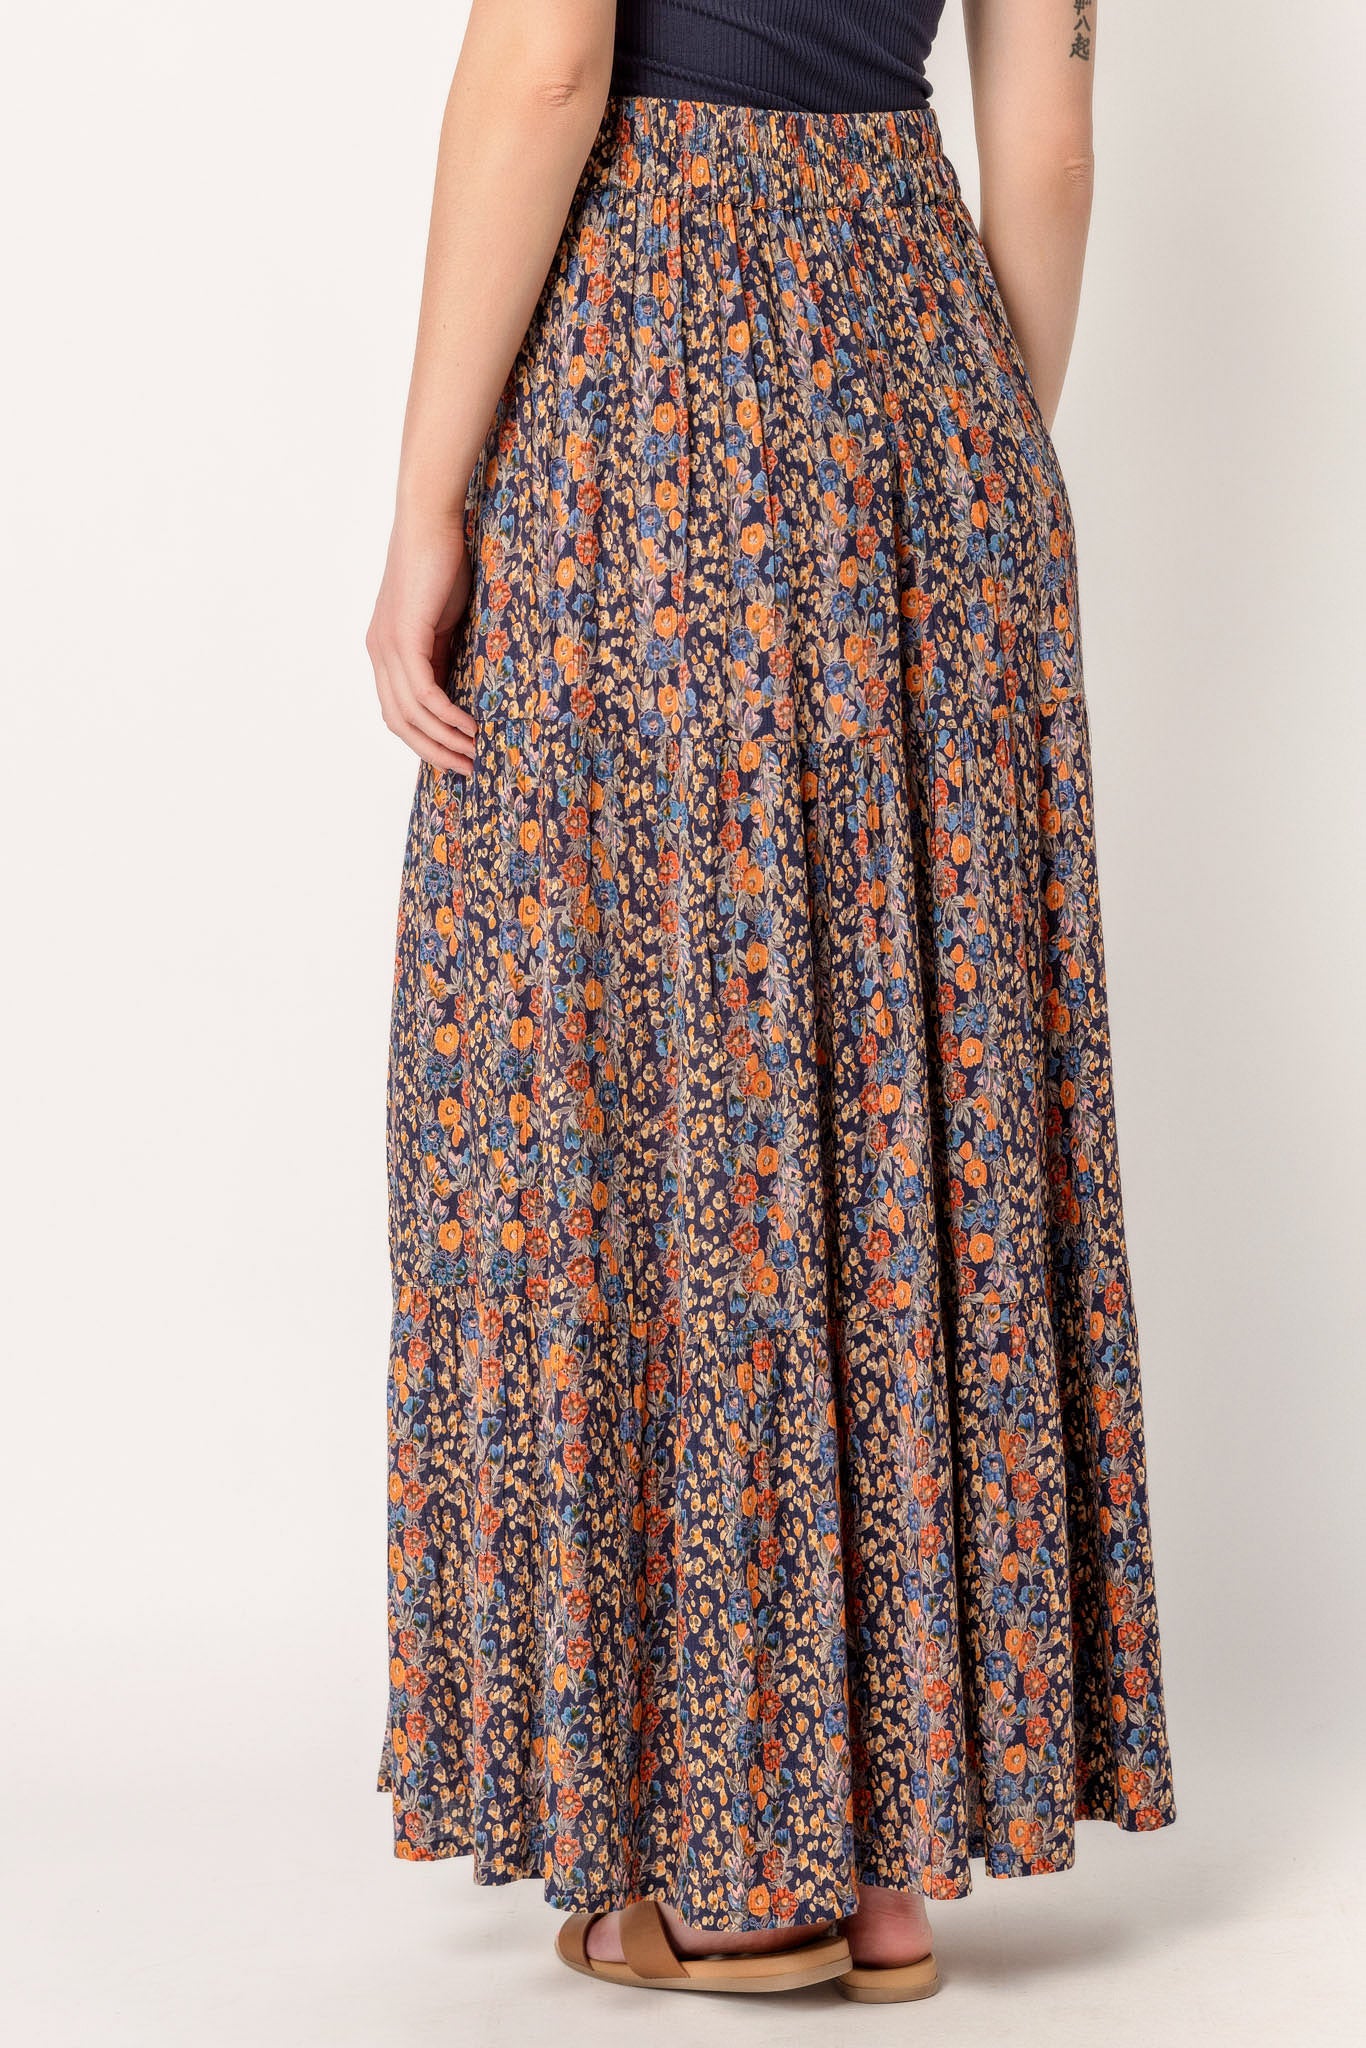 Ditsy Peasant Skirt with Slit